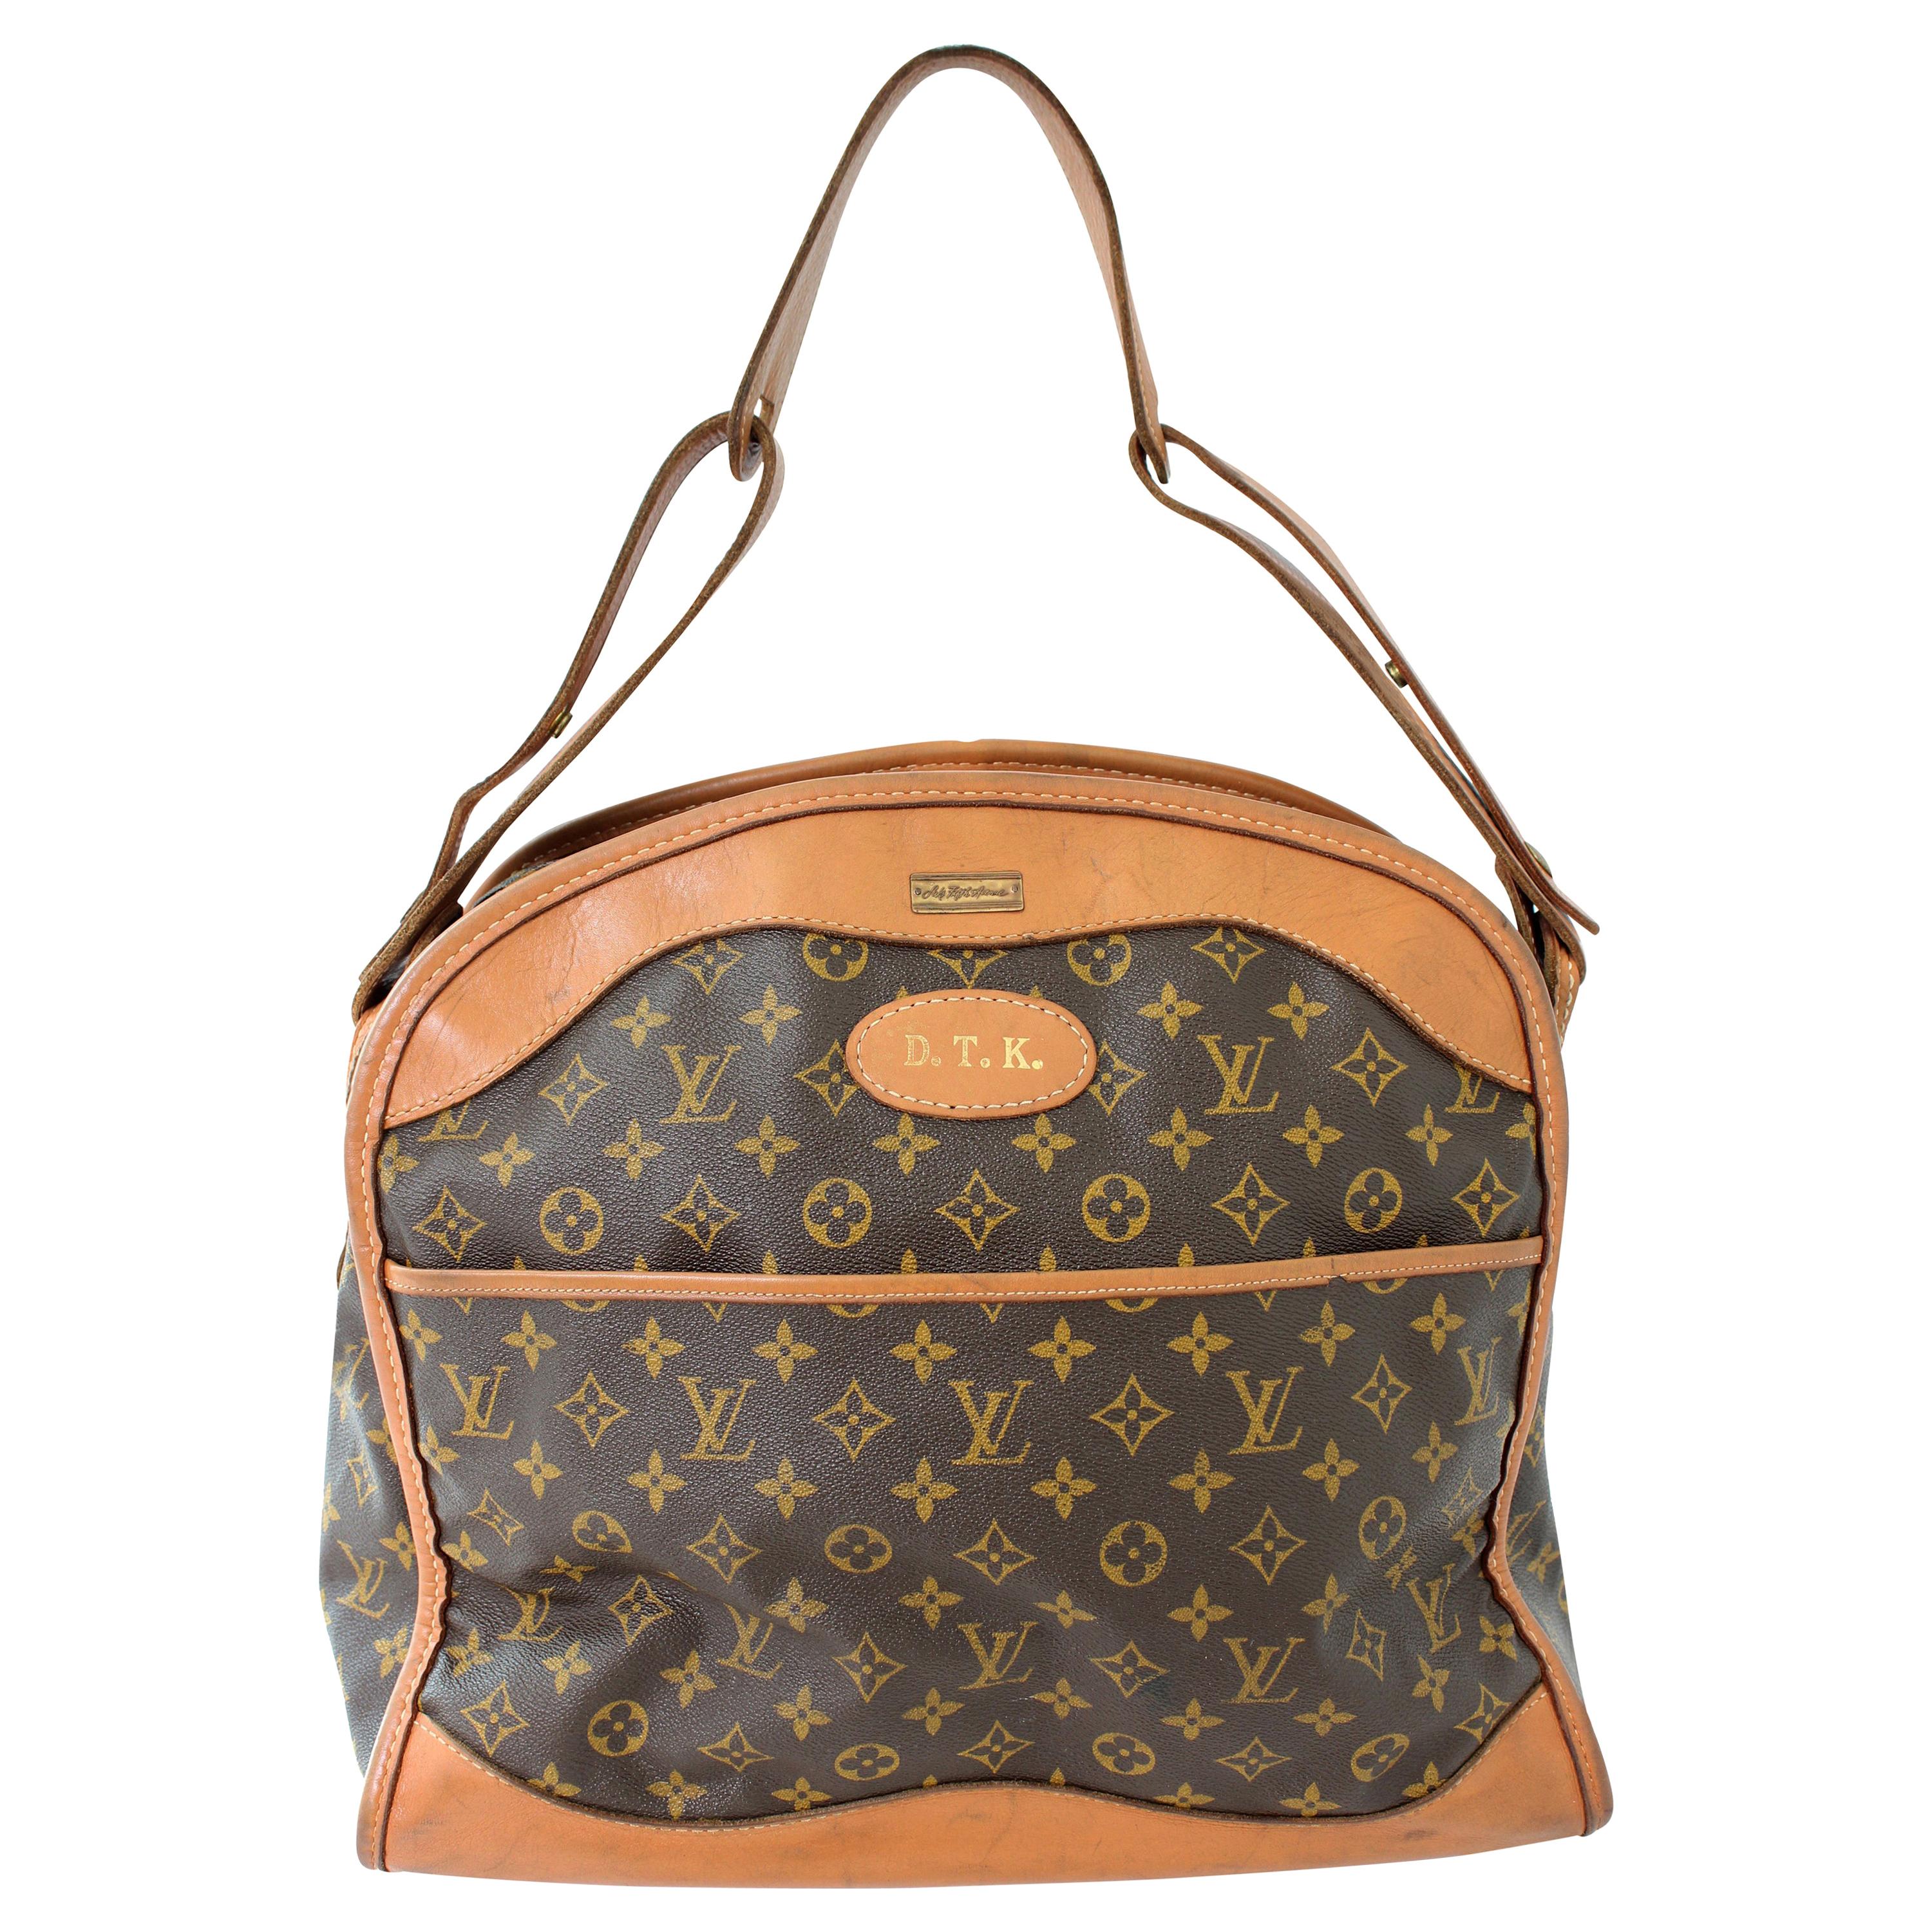 Louis Vuitton Carry On Bag Luggage Tote Monogram Canvas French Co. Saks 70s